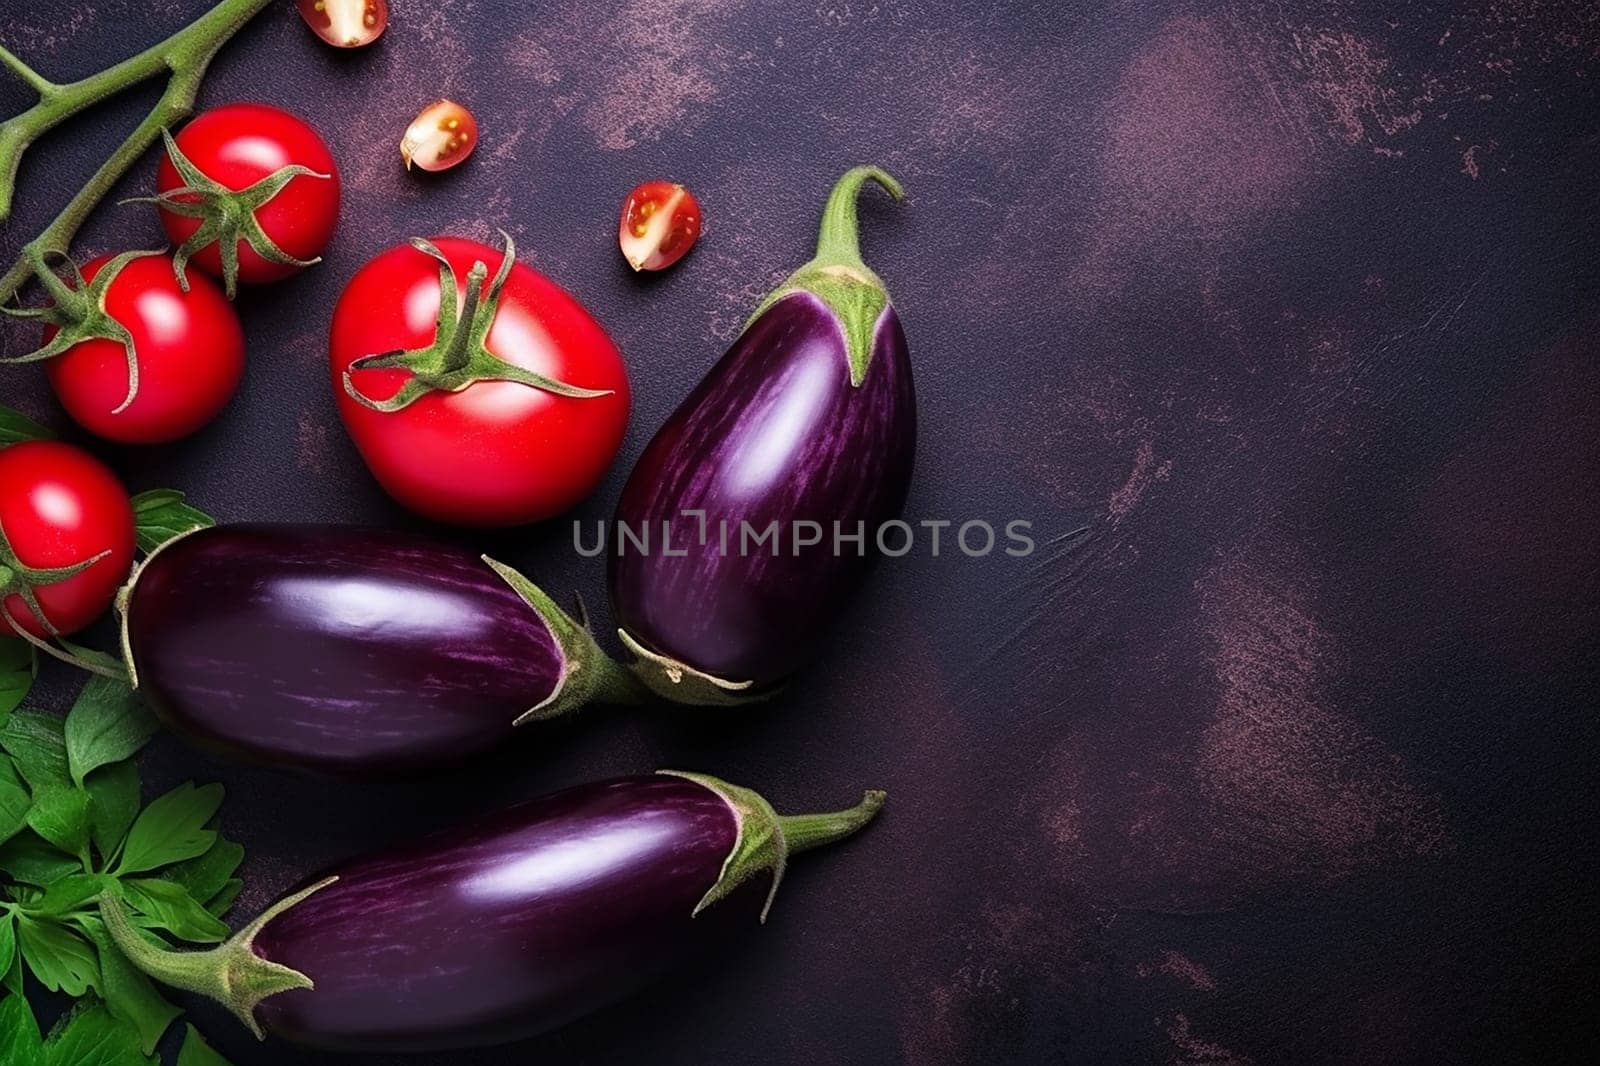 Three fresh eggplants with ripe tomatoes and greenery on a dark textured surface. by Hype2art